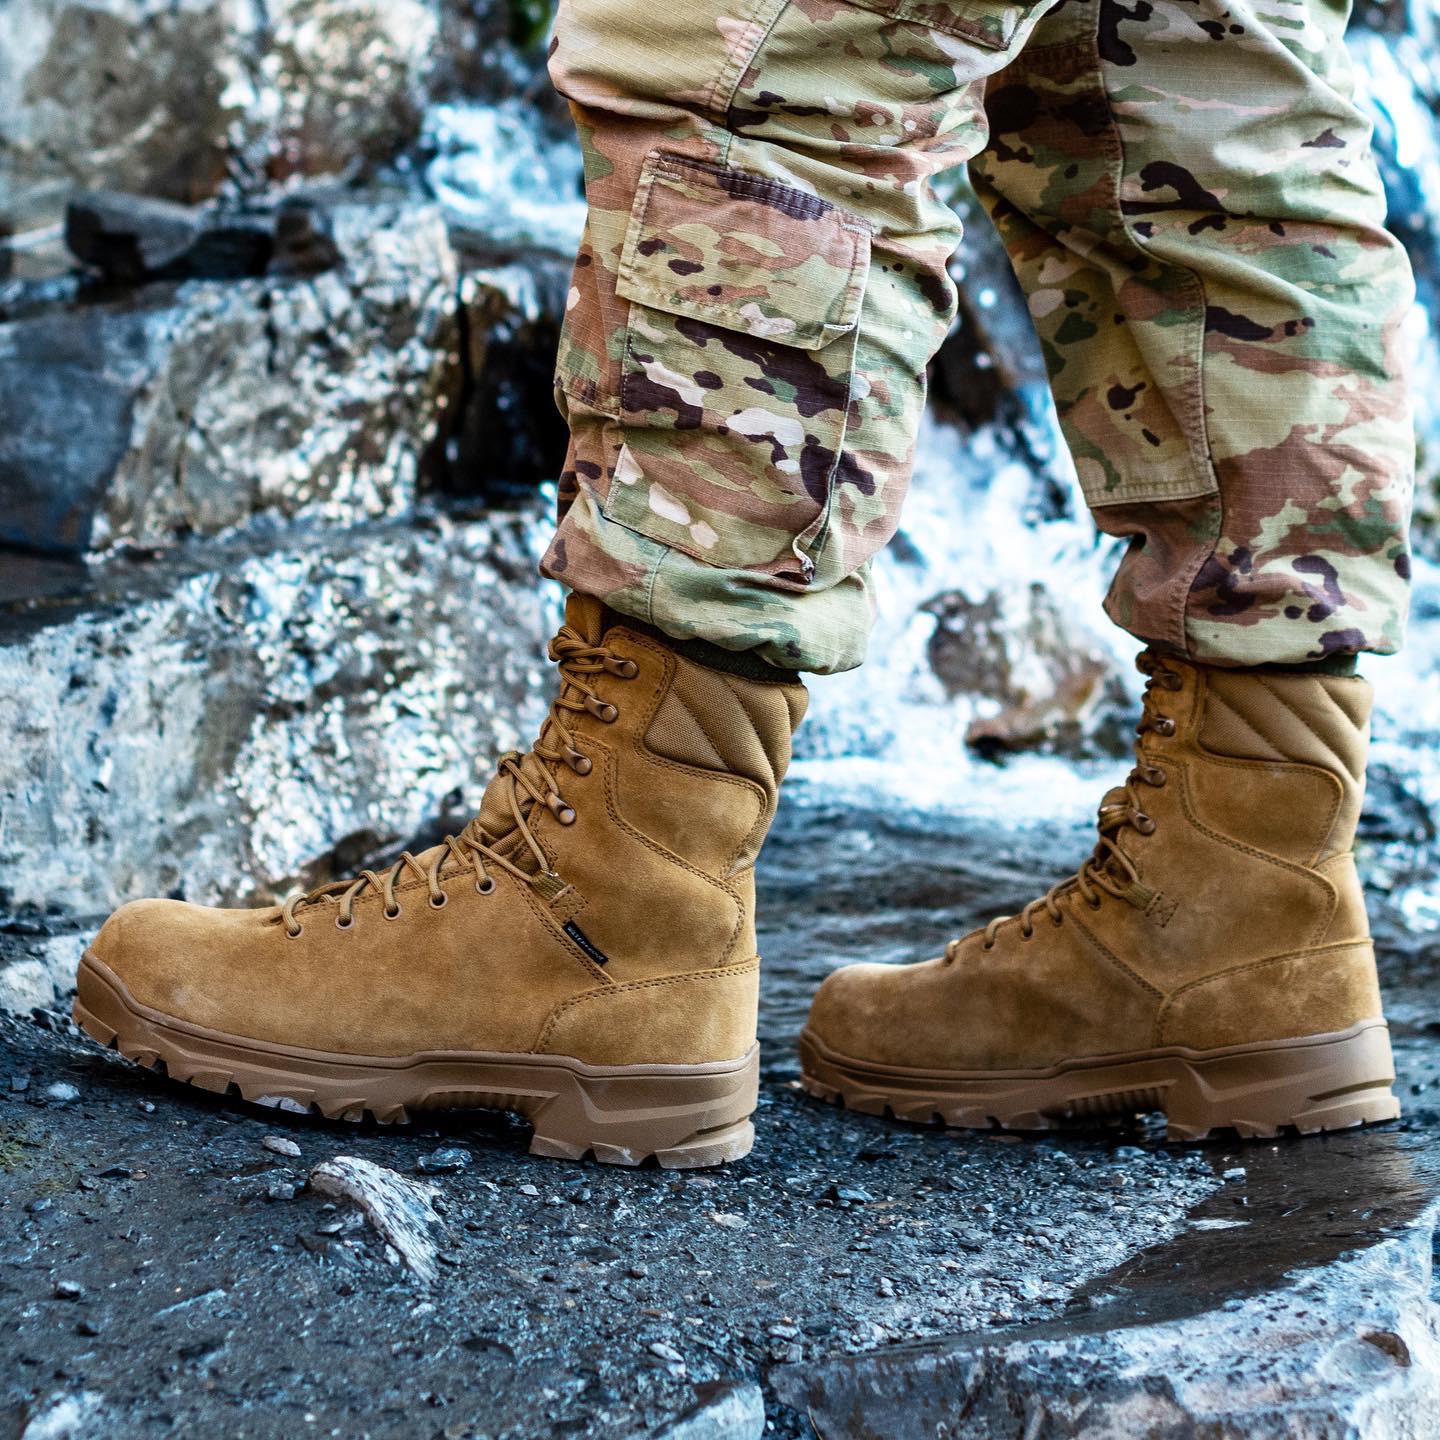 Belleville Squall Safety Boot for Cold Weather - Soldier Systems Daily